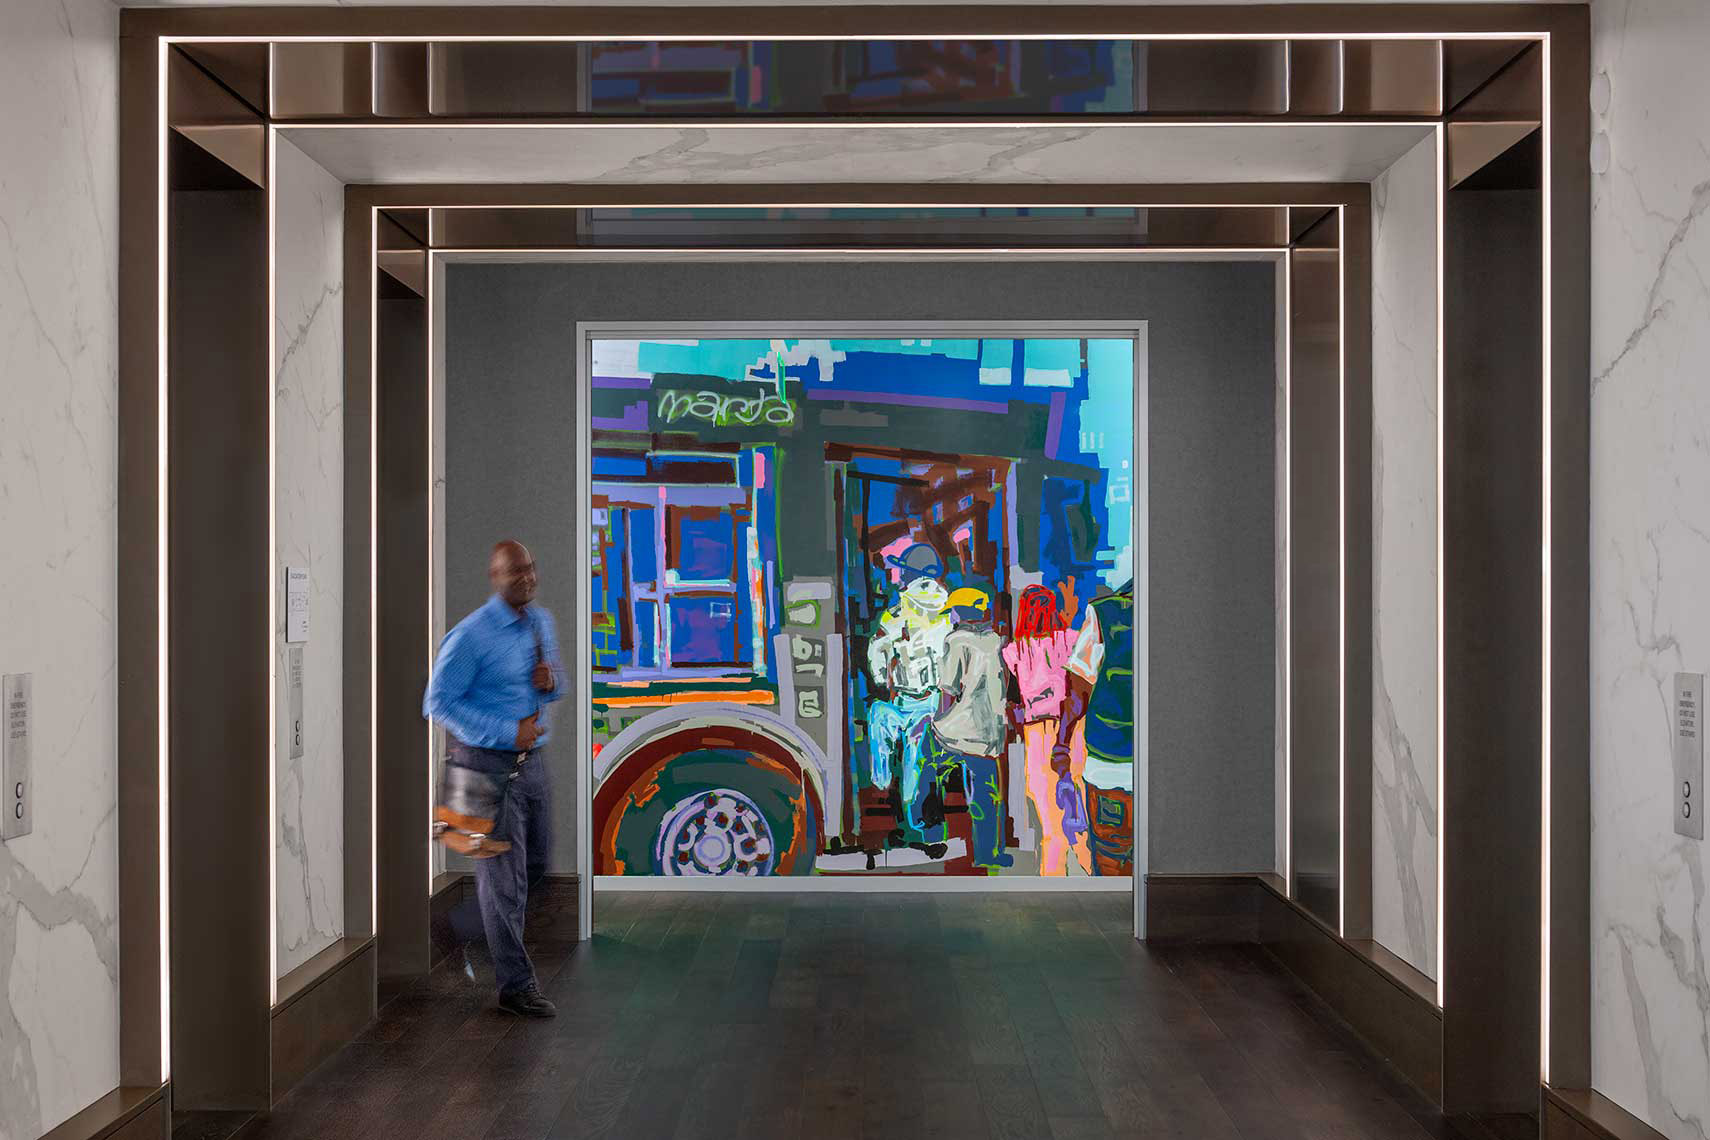 Interior view of elevator lobby with mural within corporate office space